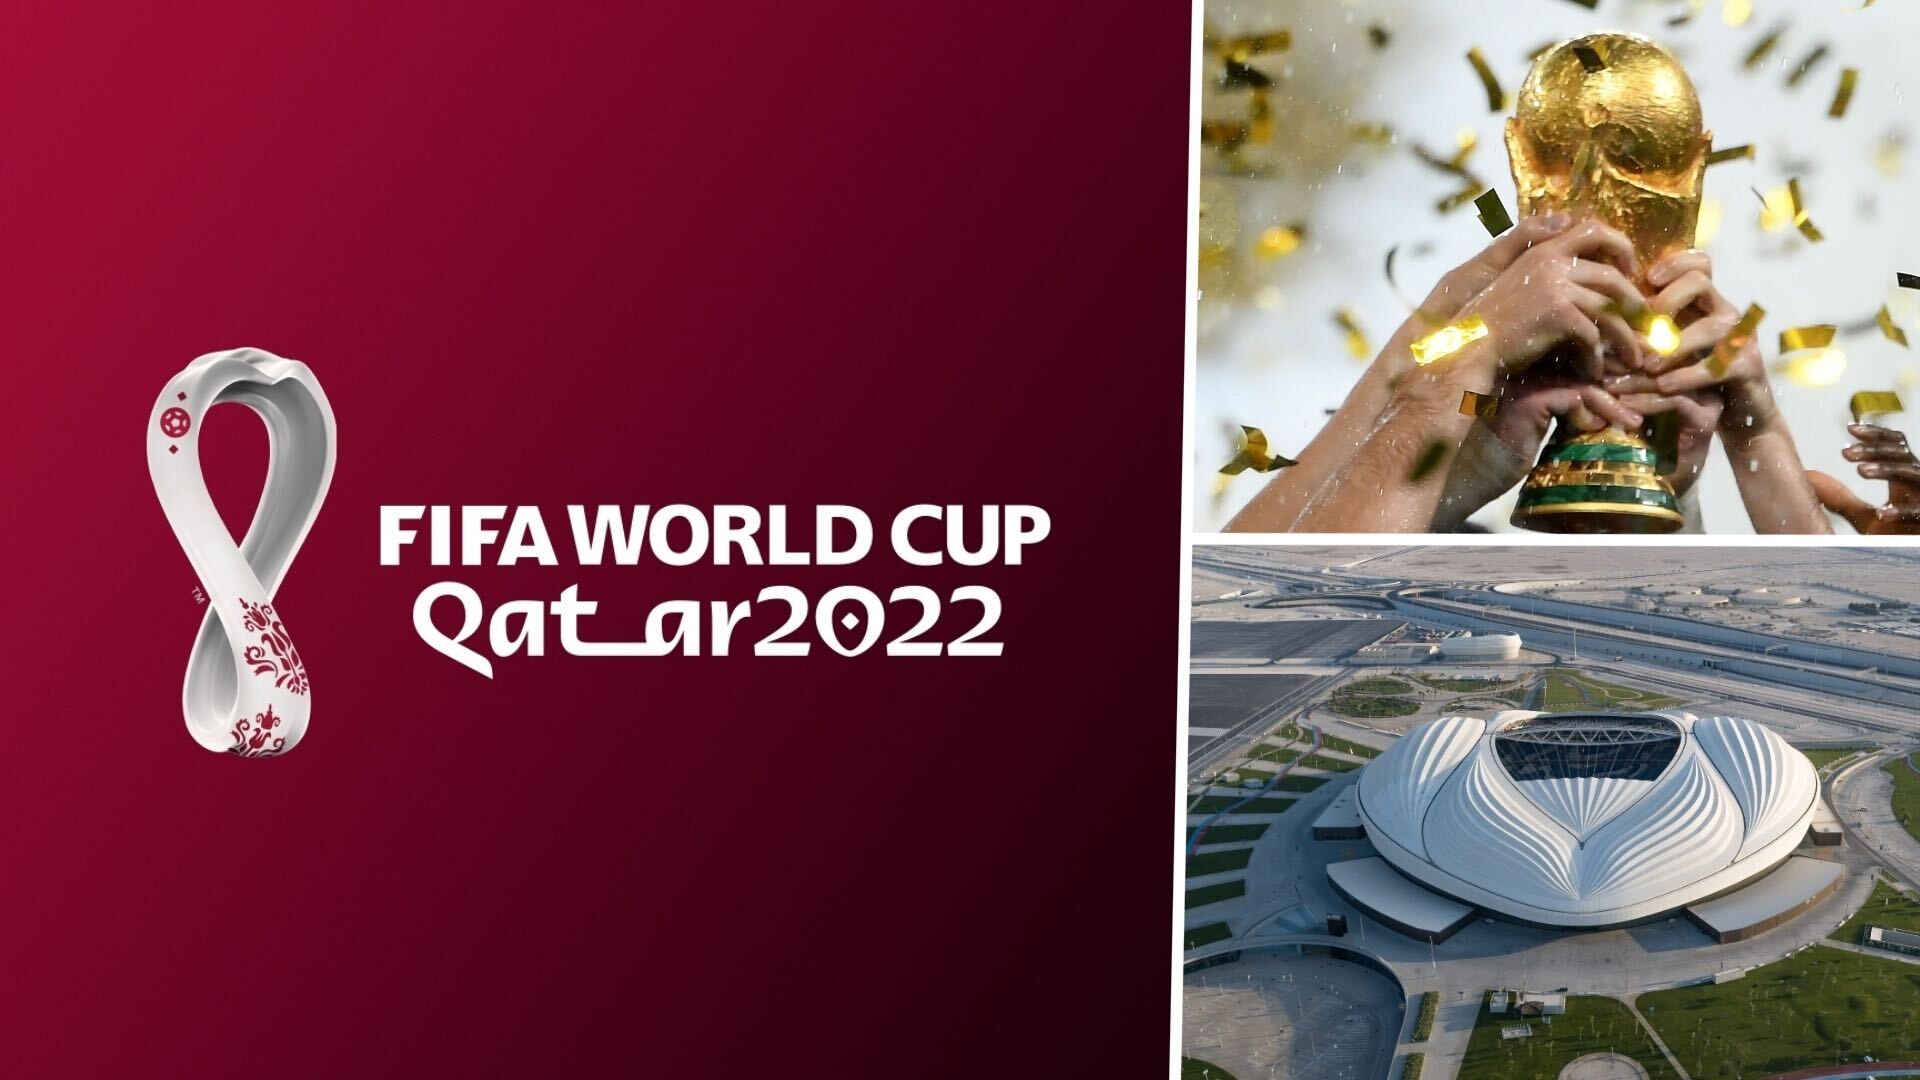 Qatar 2022: What you need to know about first of a kind FIFA World Cup